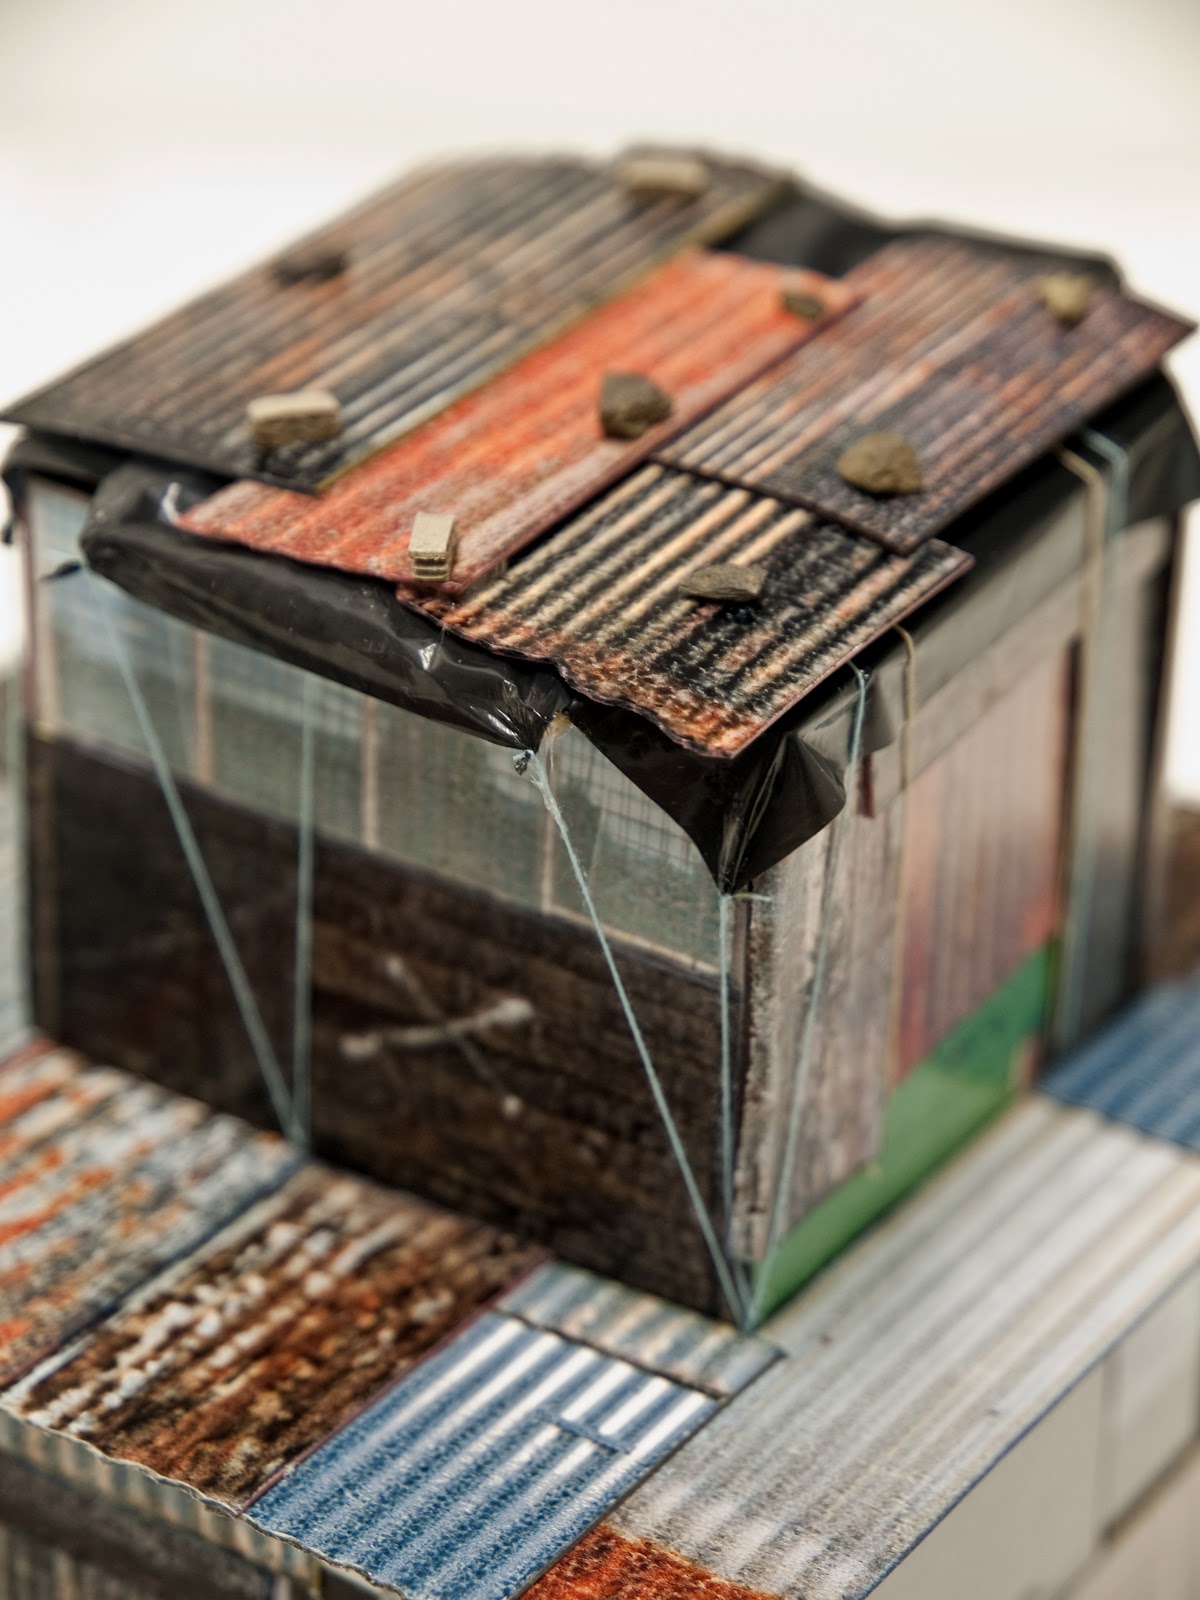 Fill in miniature artistic box. Small Houses Ceramics. Small Scale. Justice Miniature photos.